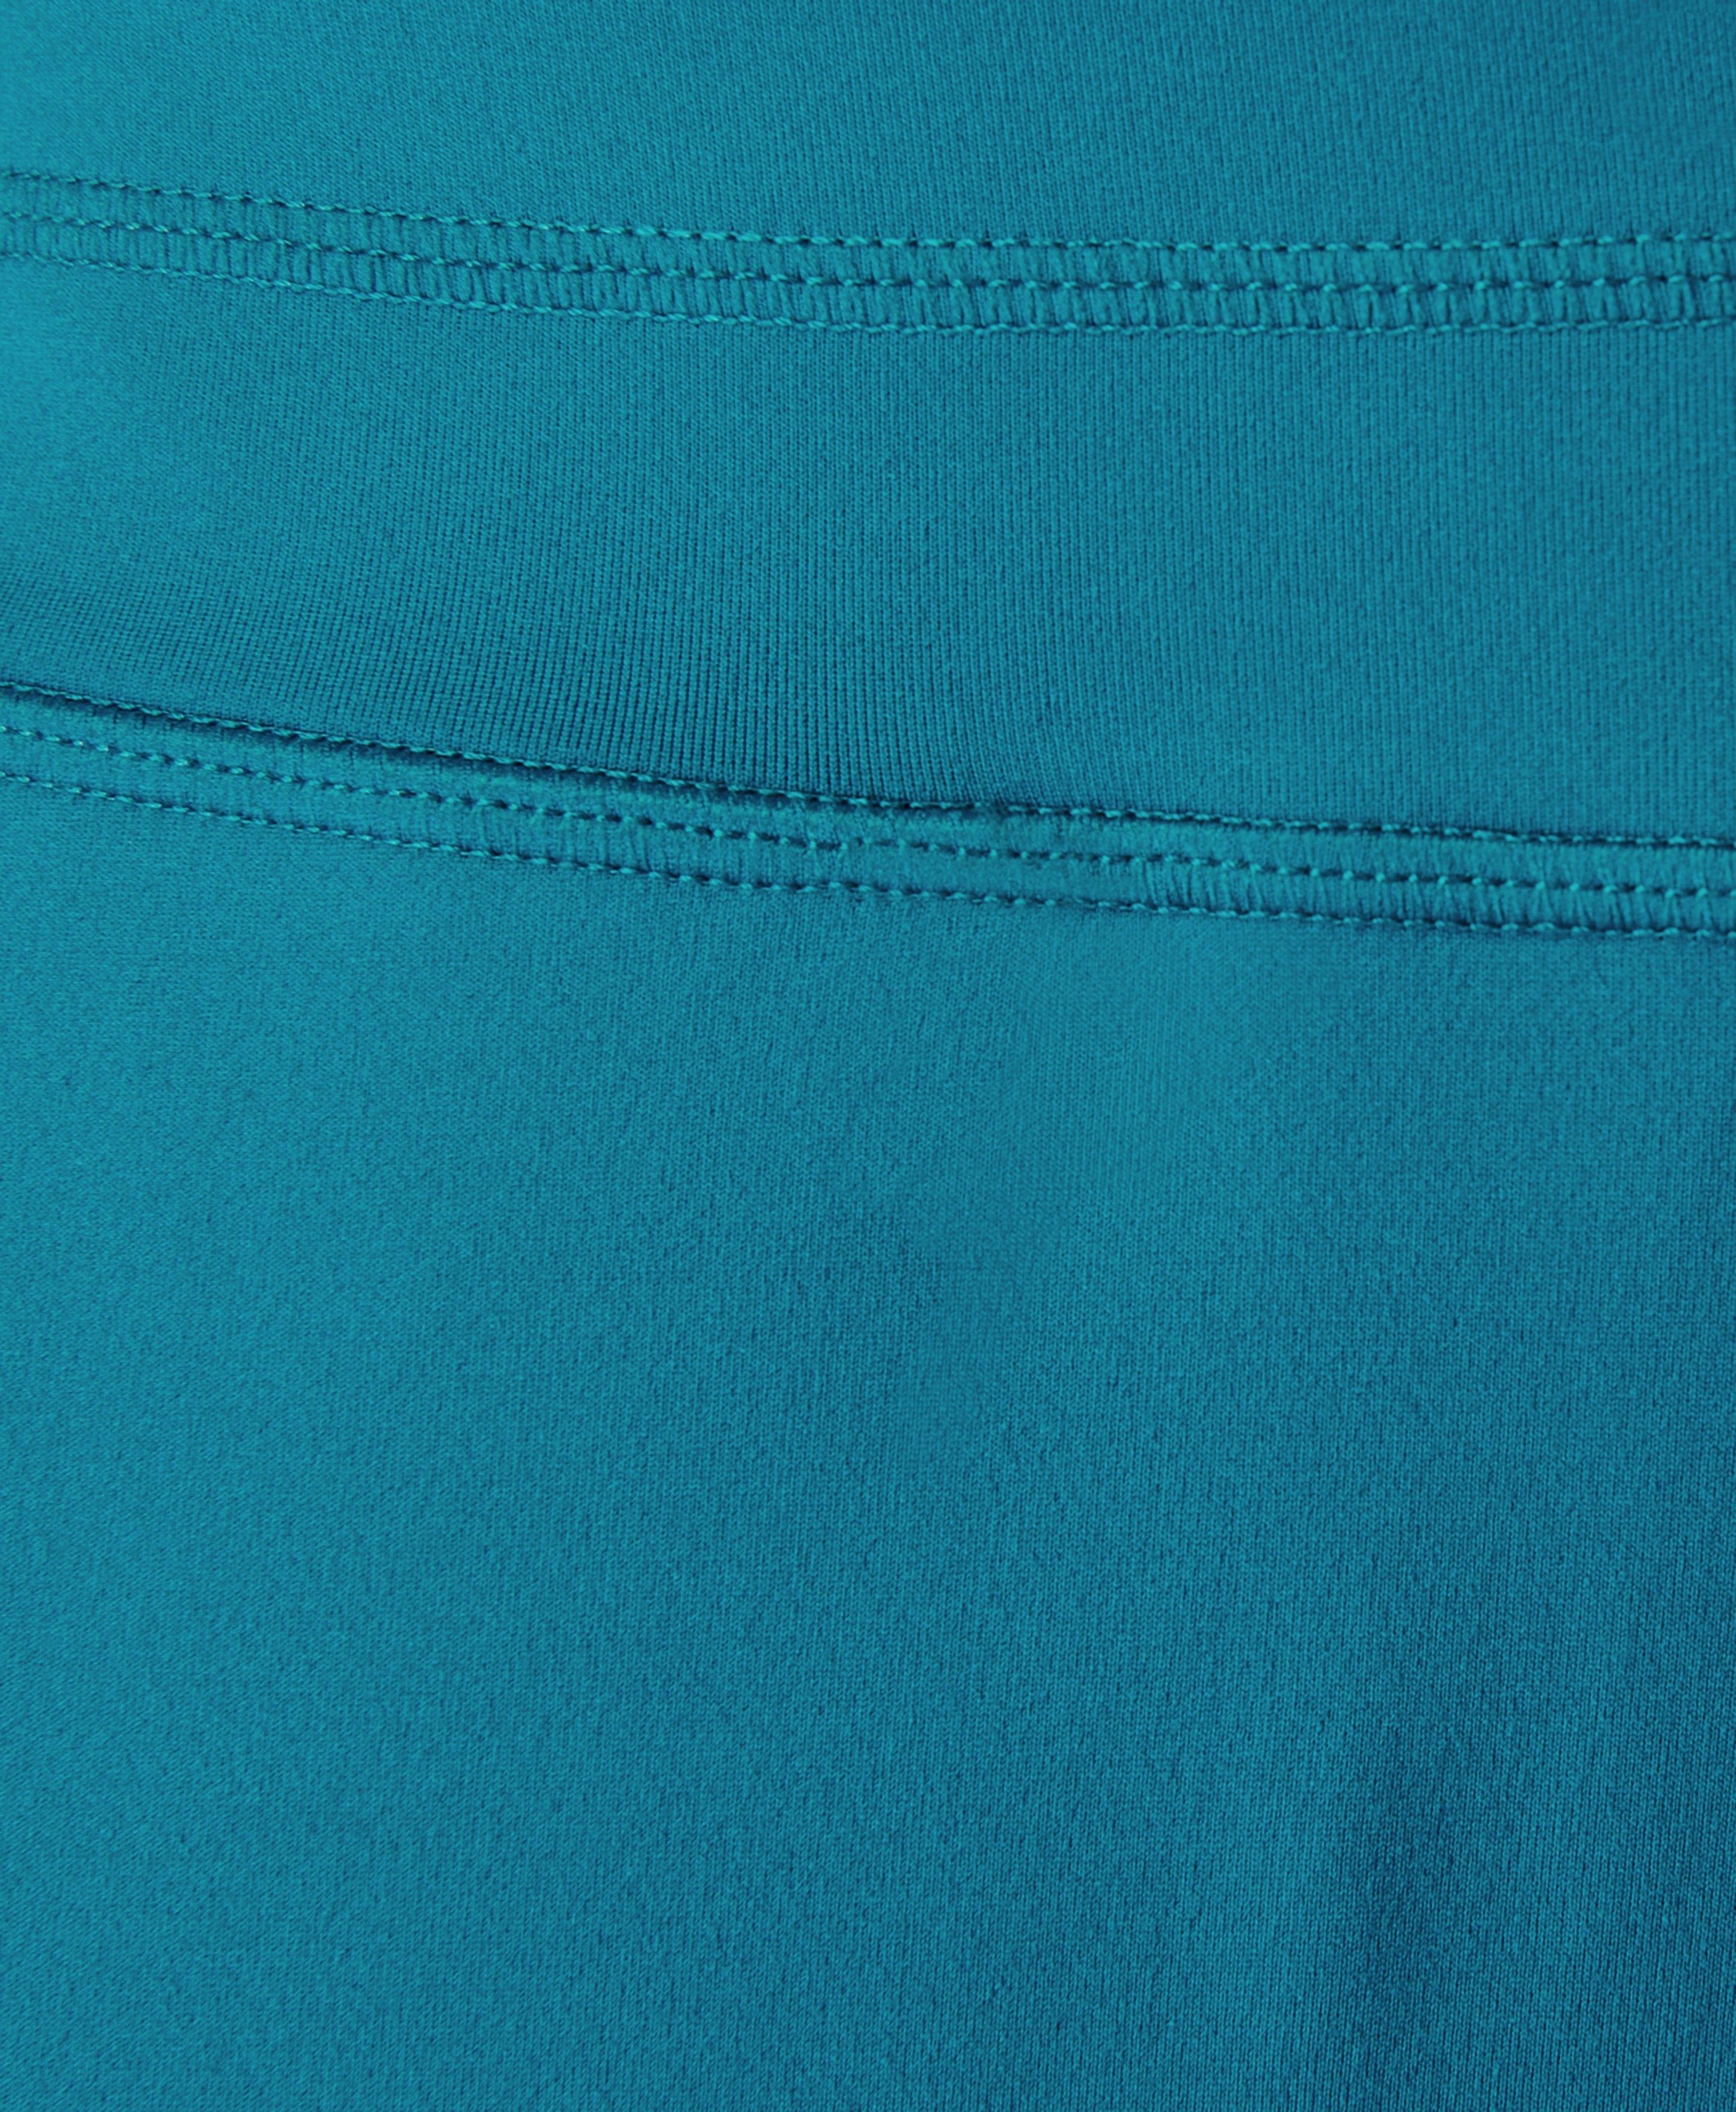 Yoga pants Relaxed Fit teal (blue), Online Shop